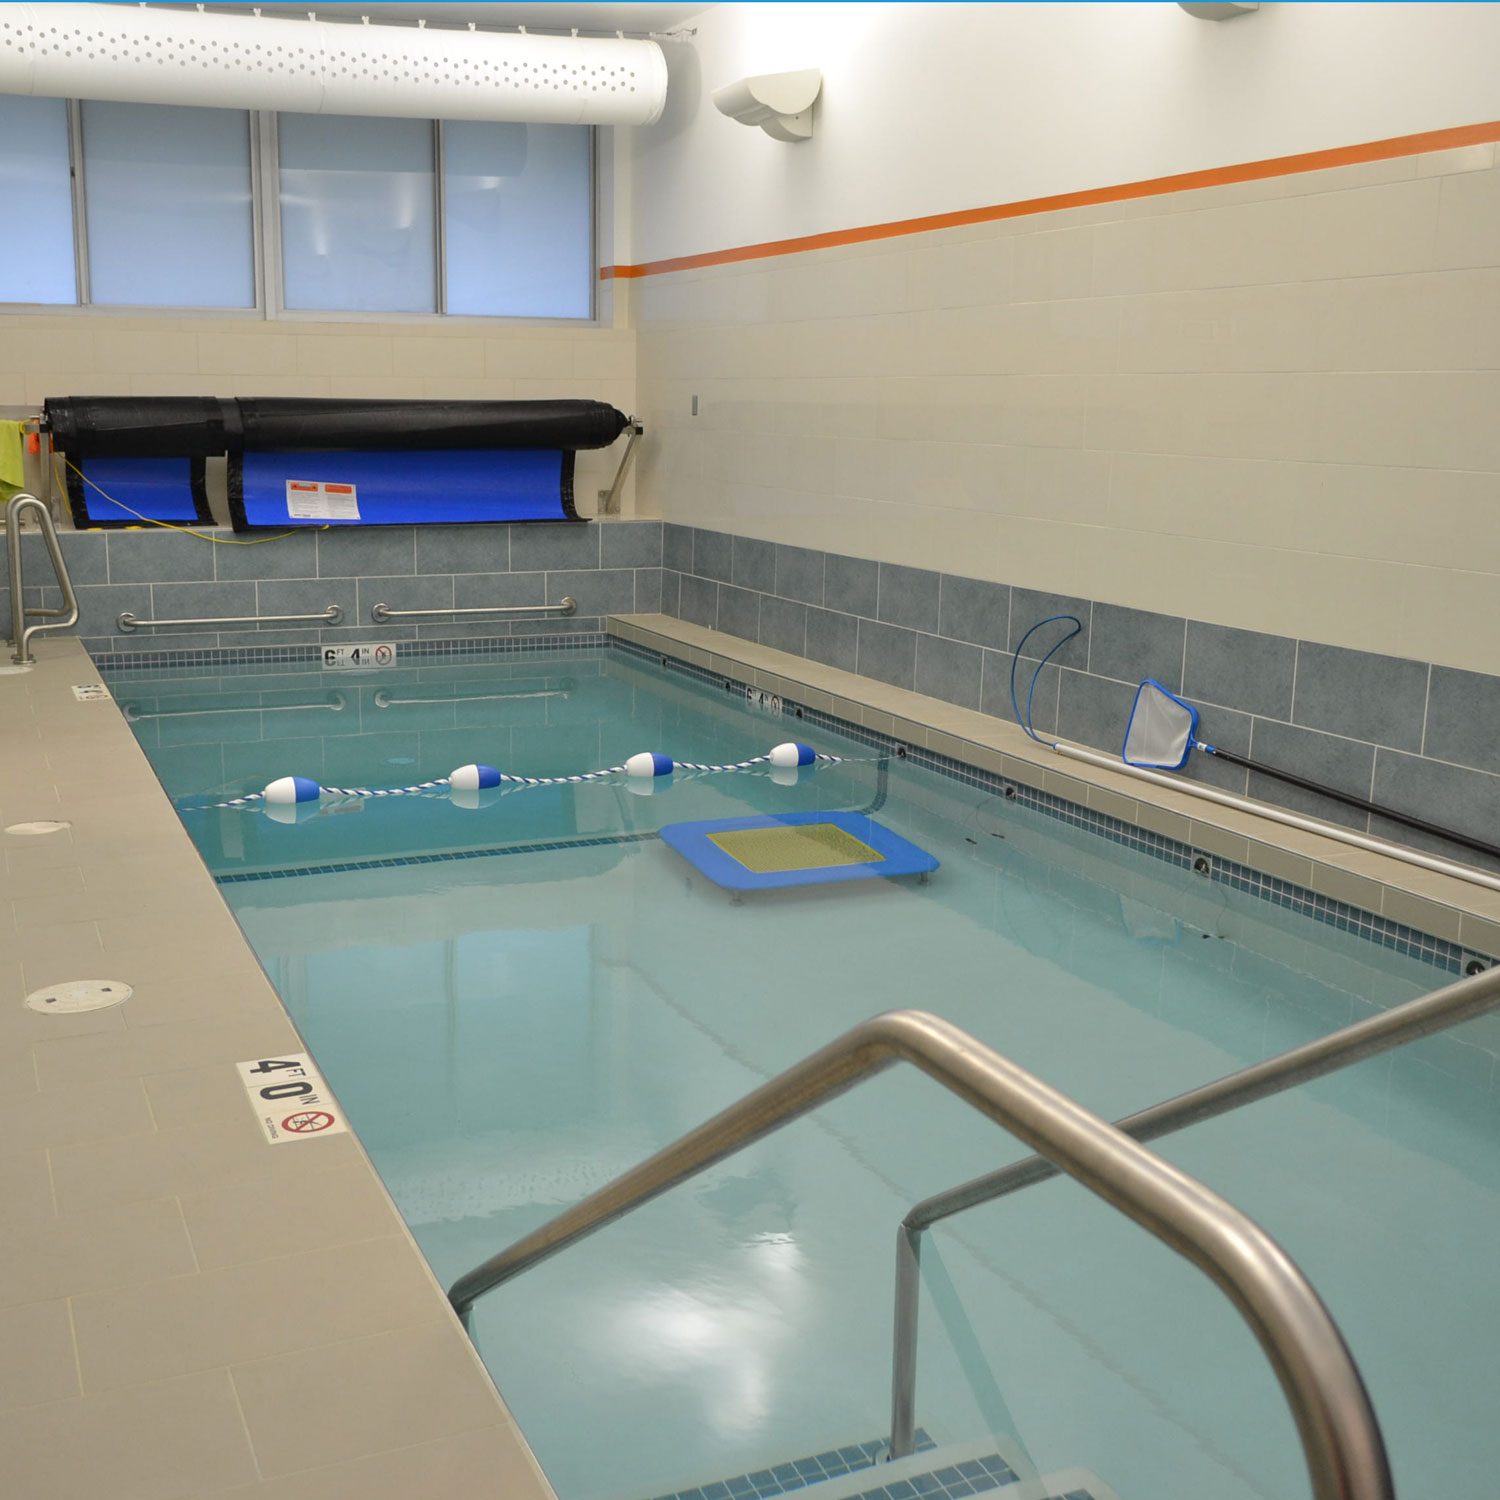 The multi-depth pool was designed for jumping workouts and to aid athletes returning from injury.